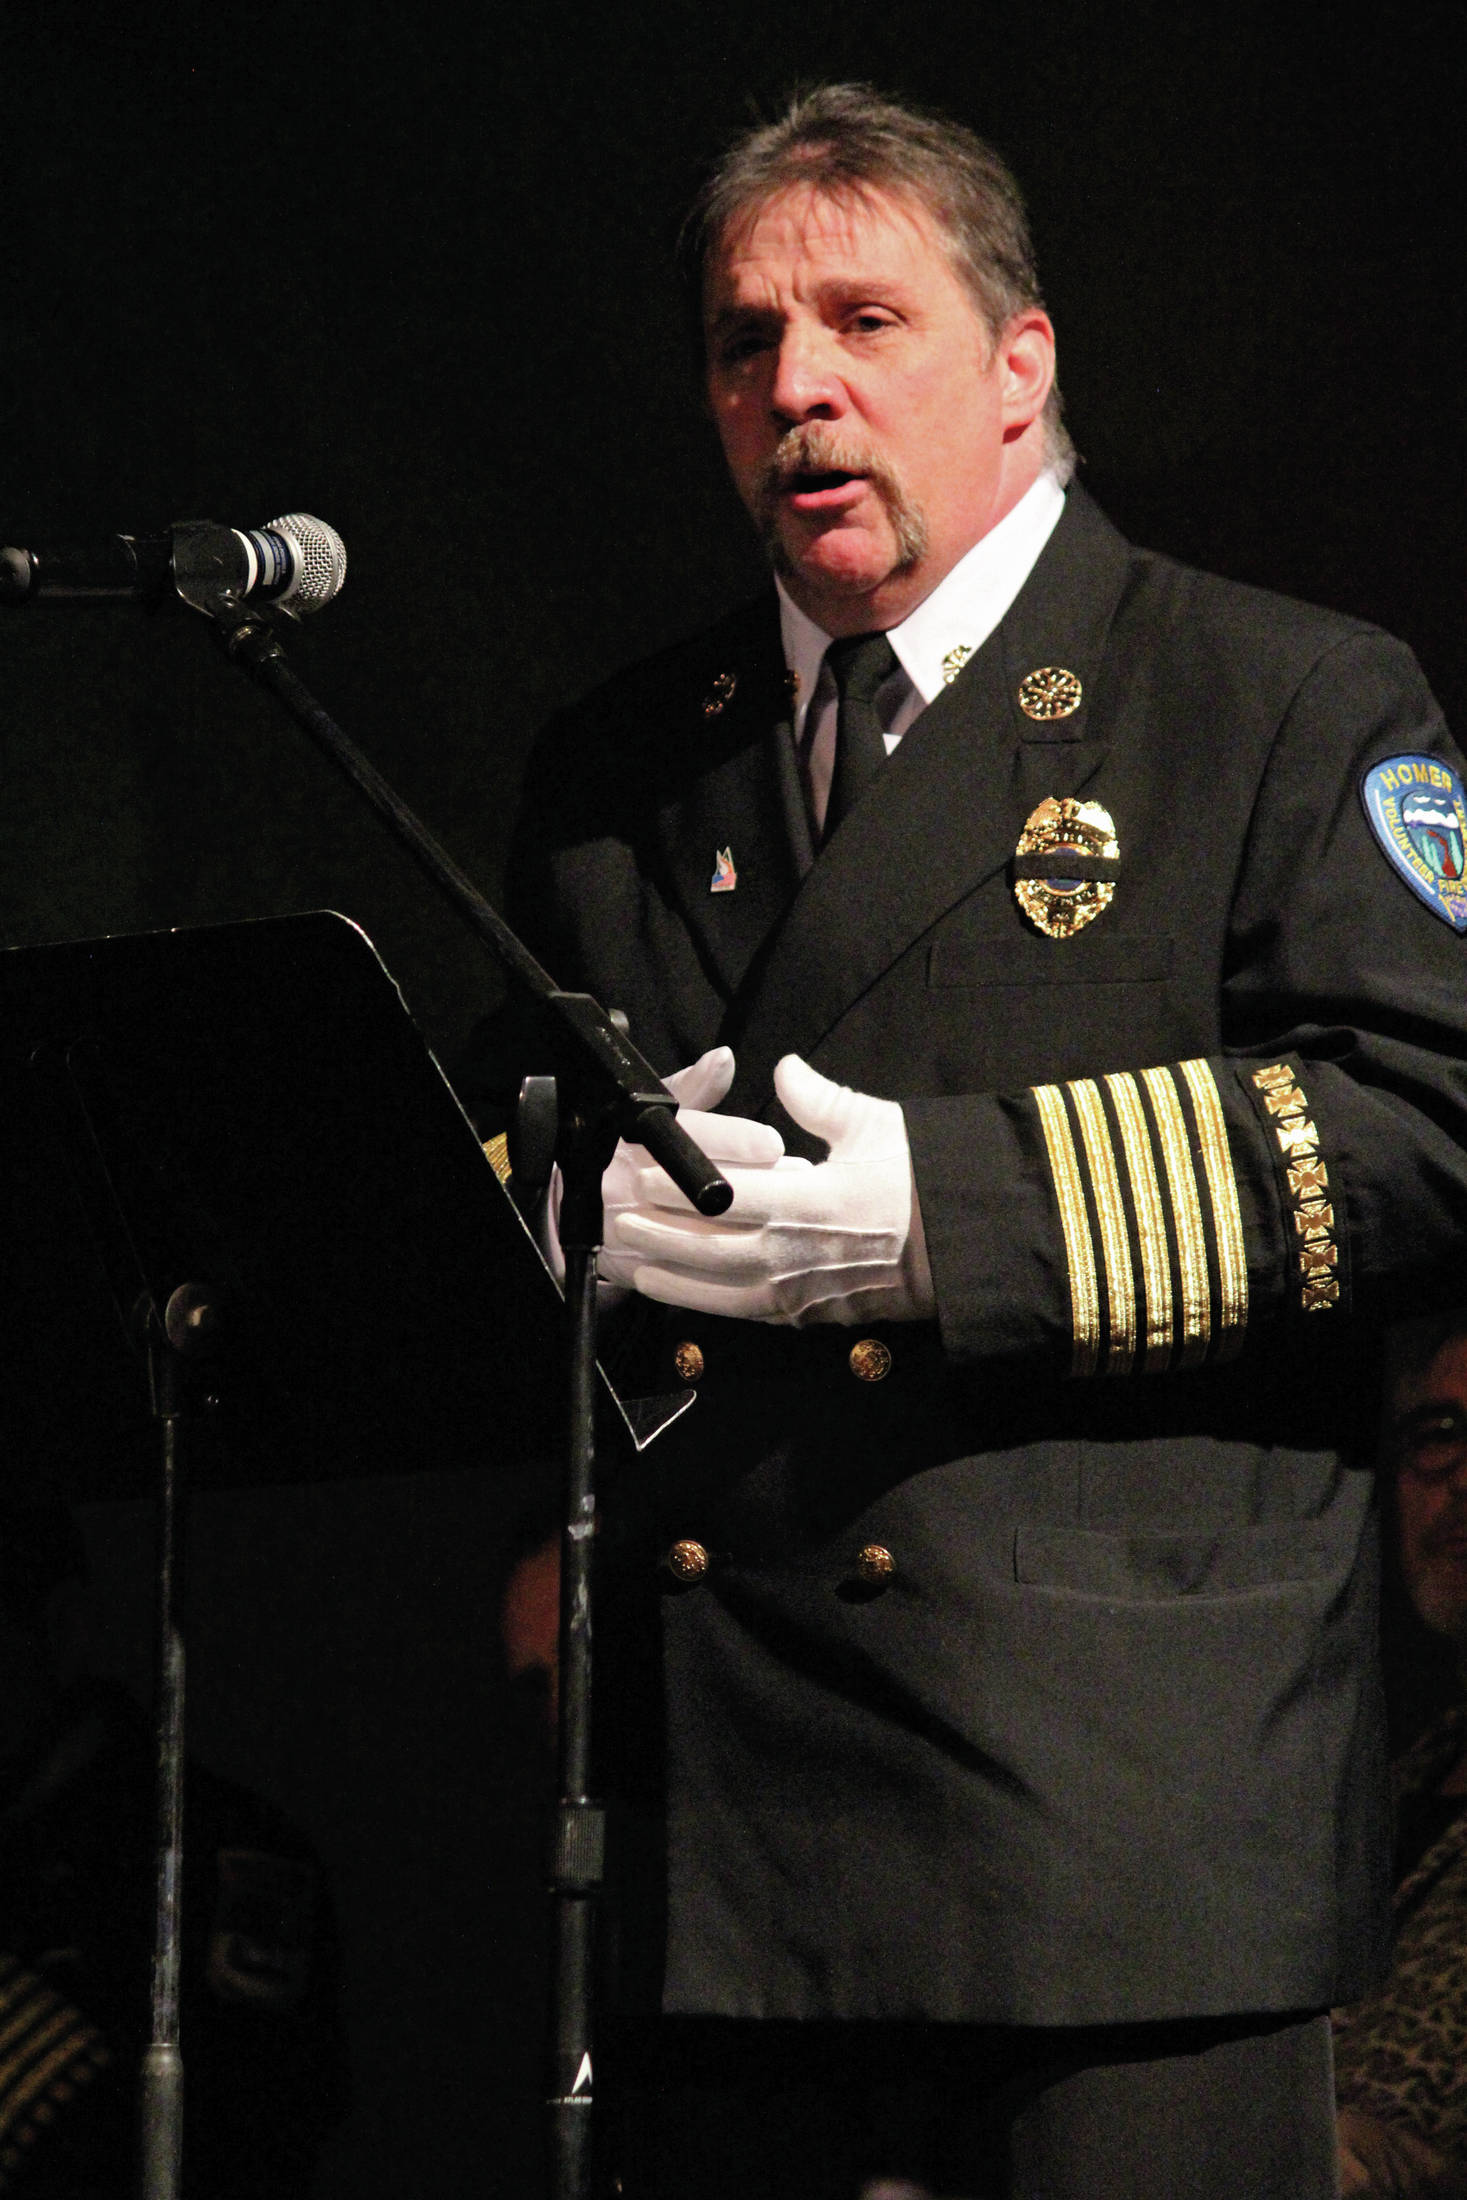 Homer Volunteer Fire Department Chief Mark Kirko speaks during a Sunday, Jan. 19, 2020 memorial for Homer resident Gary Thomas at the Homer Mariner Theatre at Homer High School in Homer, Alaska. Thomas, who was killed this month in a water heater explosion, was a volunteer firefighter for more than 40 years. (Photo by Megan PacerHomer News)